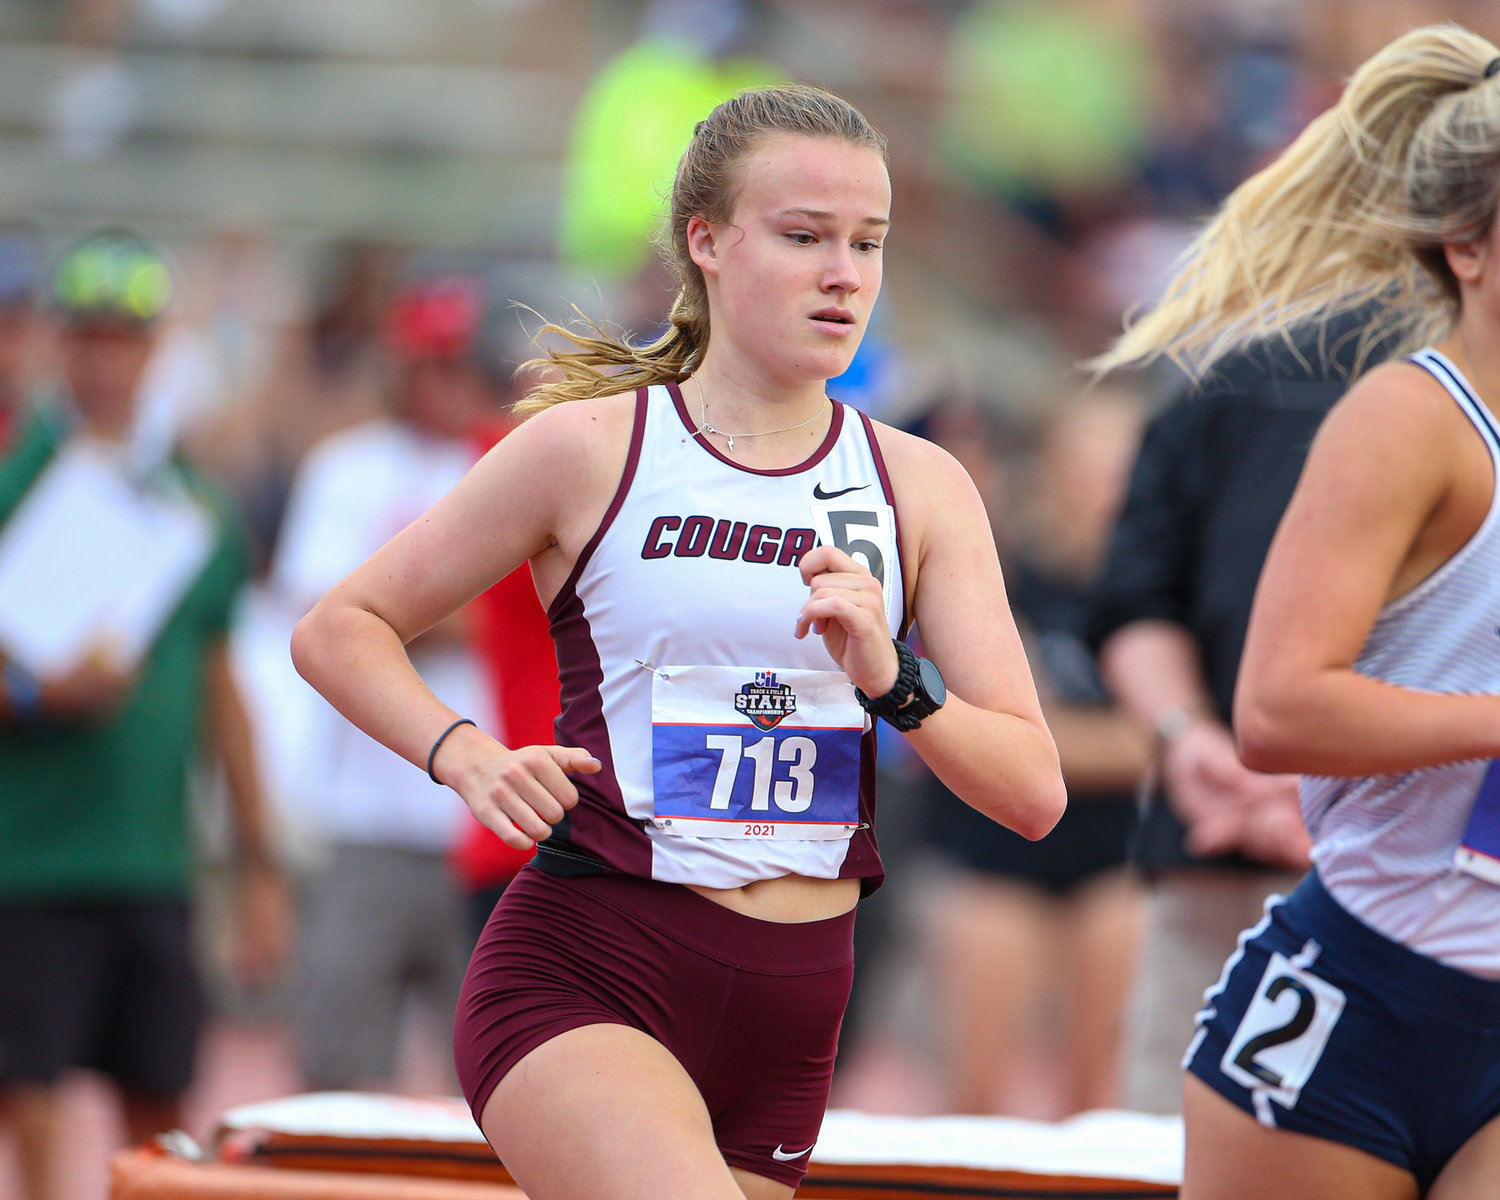 Heidi Nielson of Cinco Ranch High School runs in the Class 6A girls 3200 meter run at the UIL State Track and Field Meet on May 8, 2021 at Mike A. Myers Stadium in Austin, Texas. Nielson earned a bronze medal in the event.